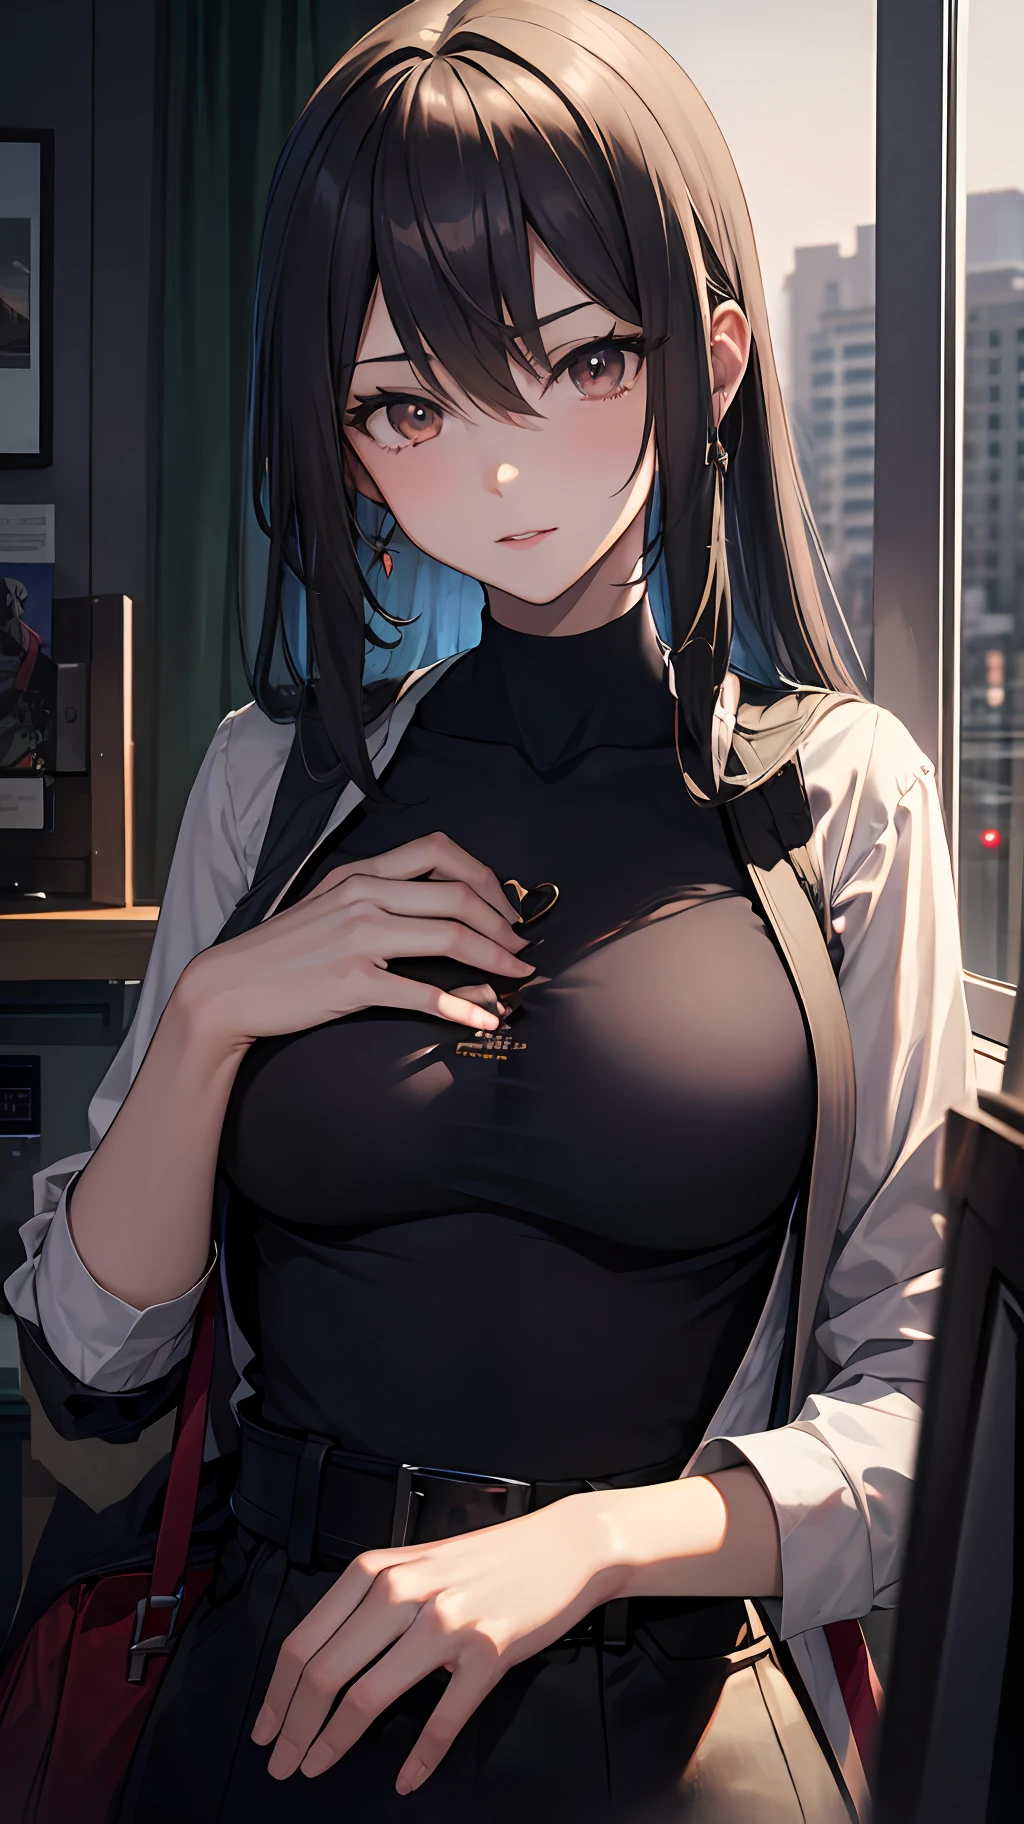 Anime girl with big breasts posing in front of the window, ((chest wide open)), ((upper body)), ((focus on people)), seductive anime girls, best anime 4k konachan wallpapers, perfect gray haired girls, charming anime girls, 4k anime wallpapers, 4k manga wallpapers,, detailed digital anime art, anime best girls, beautiful anime girl, cyberpunk, detailed anime artwork, beautiful attractive anime woman